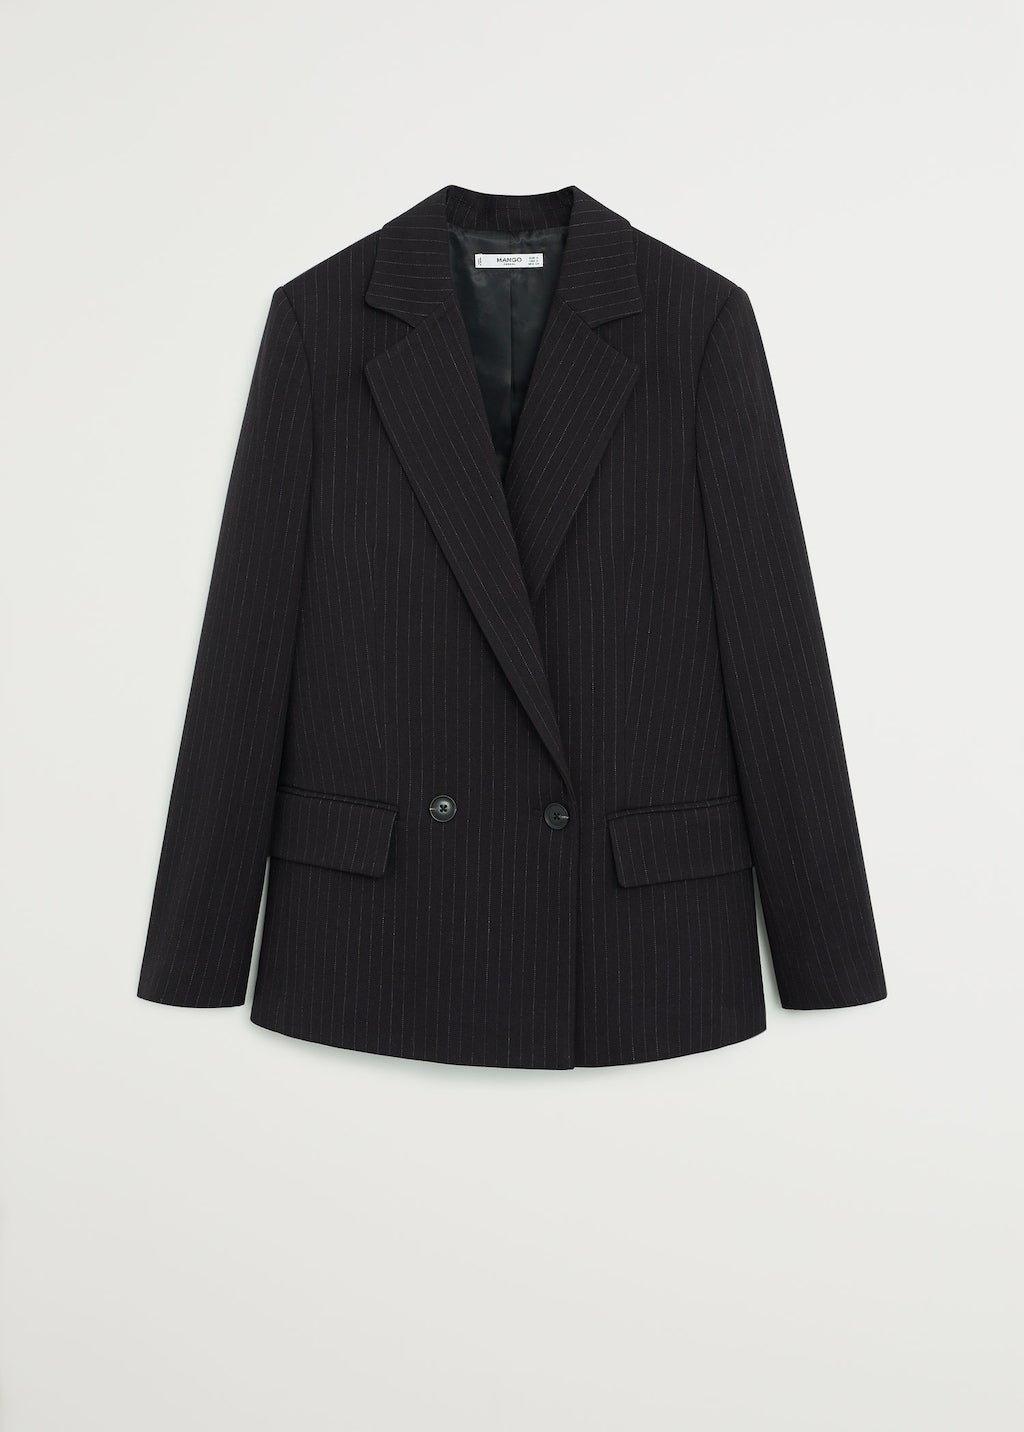 Mango Committed + Double-Breasted Blazer